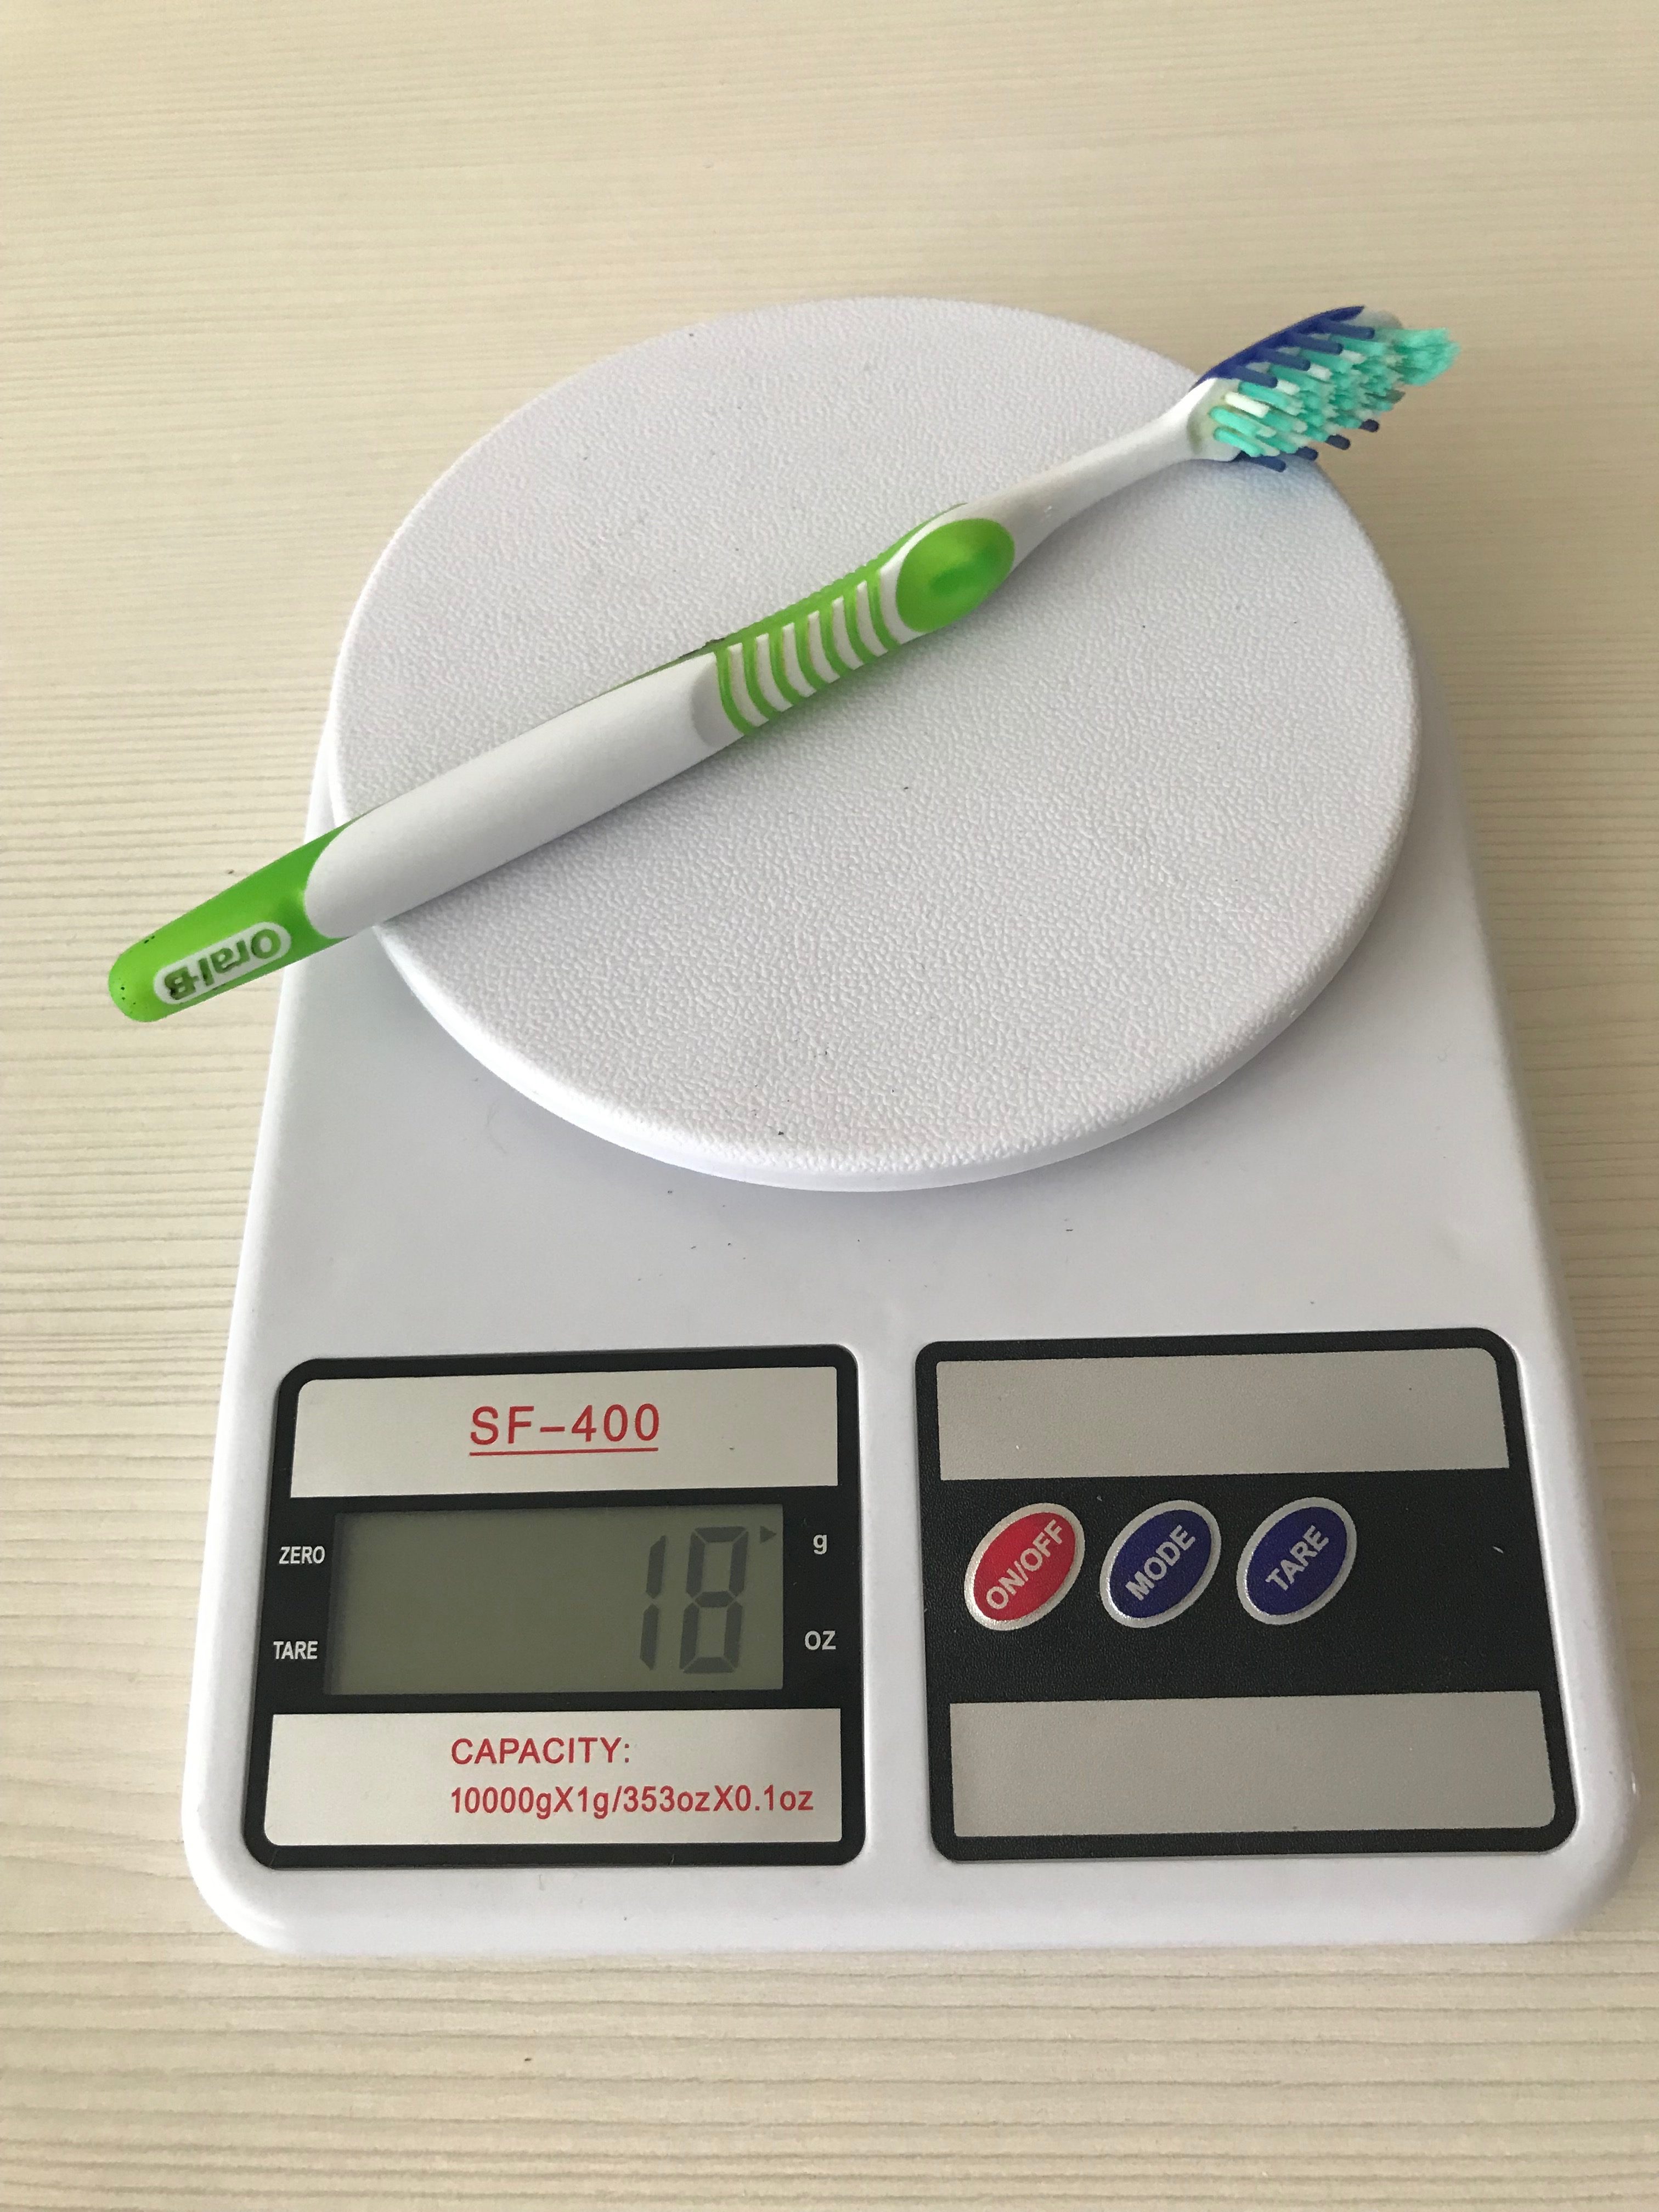 How much does a toothbrush weigh?